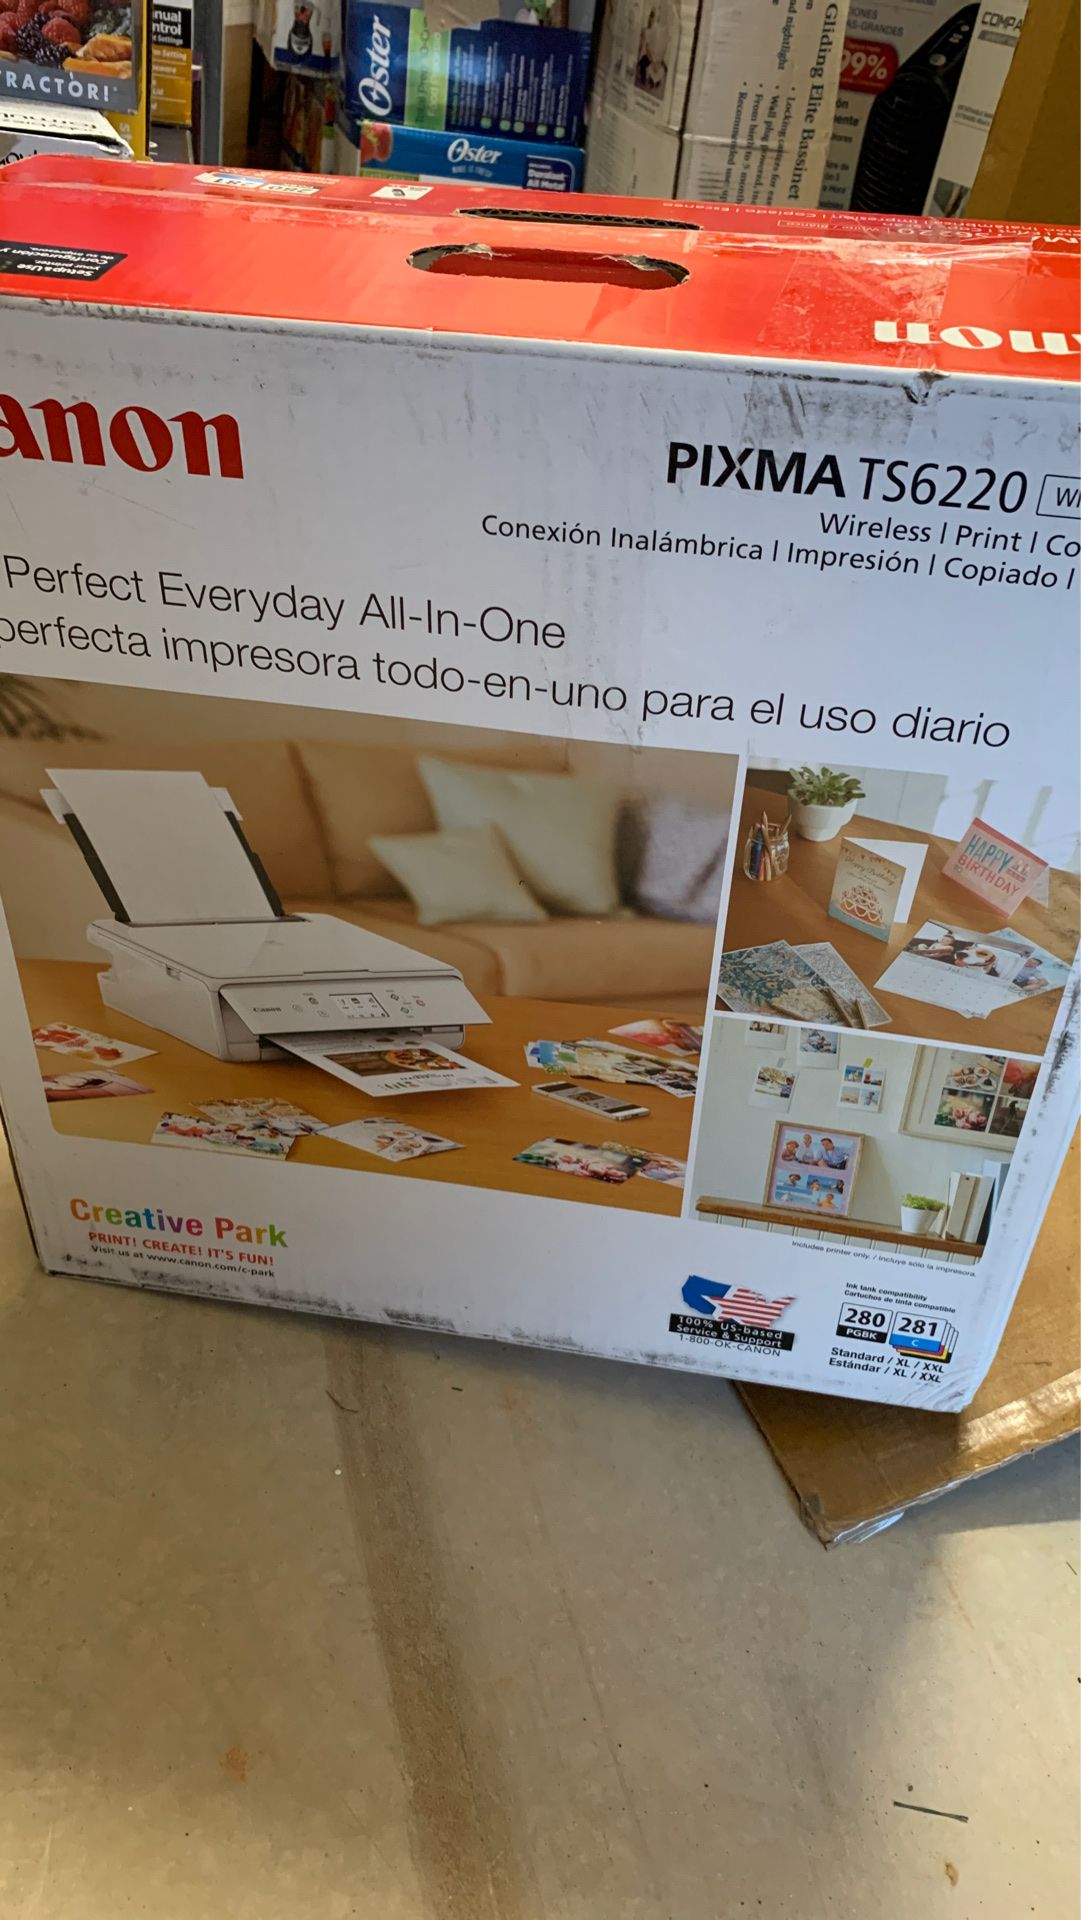 Canon 2986C002 PIXMA TS6220 Wireless All in One Photo Printer with Copier, Scanner and Mobile Printing, White